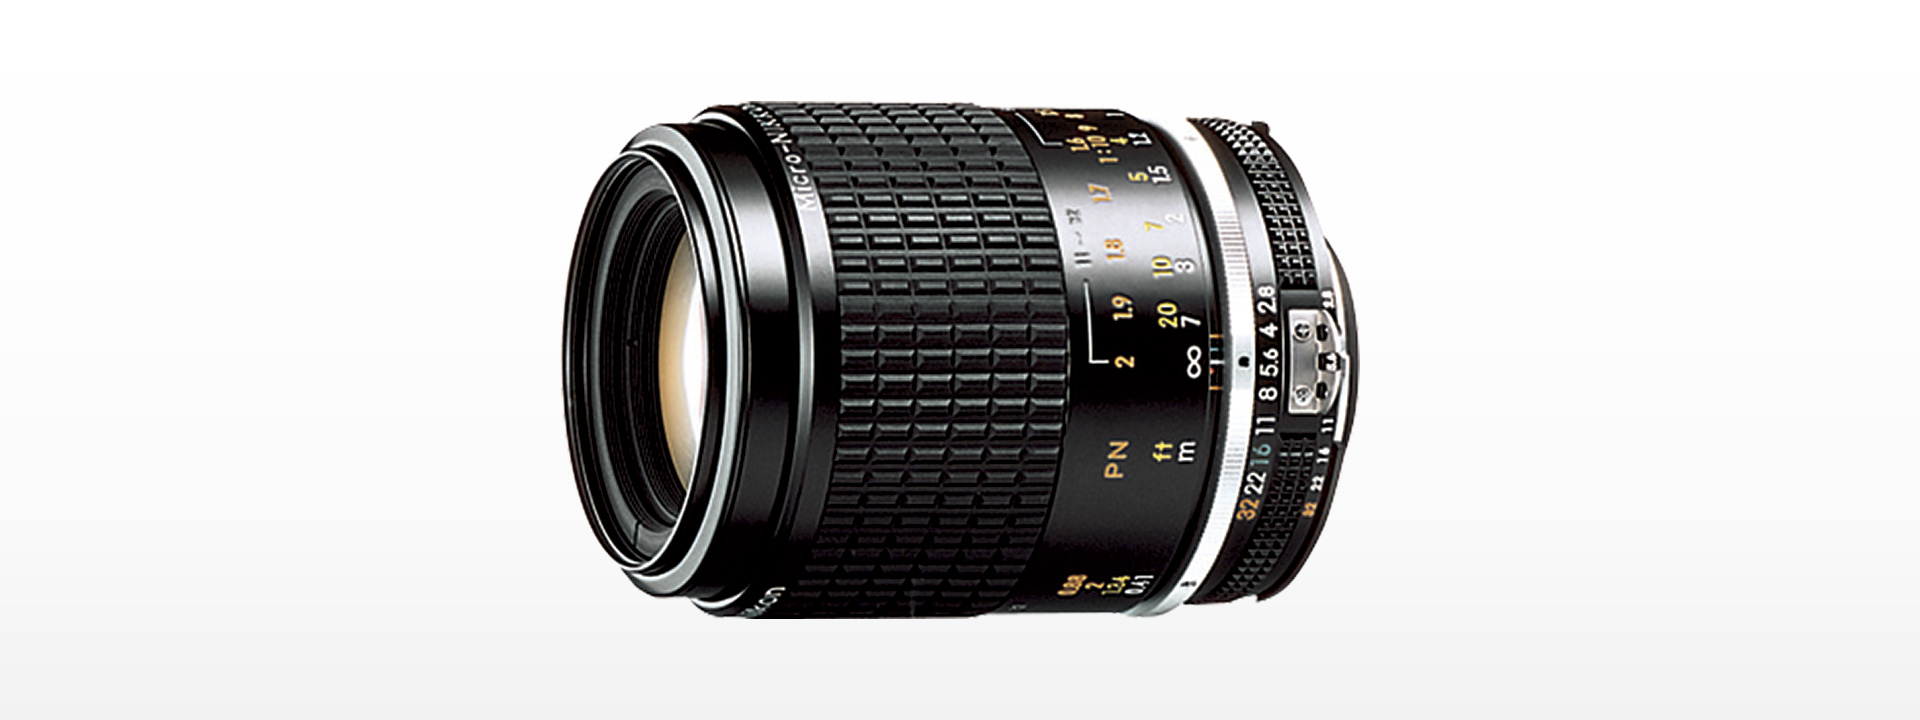 Micro-Nikkor 105mm f/2.8 マクロ　マイクロ